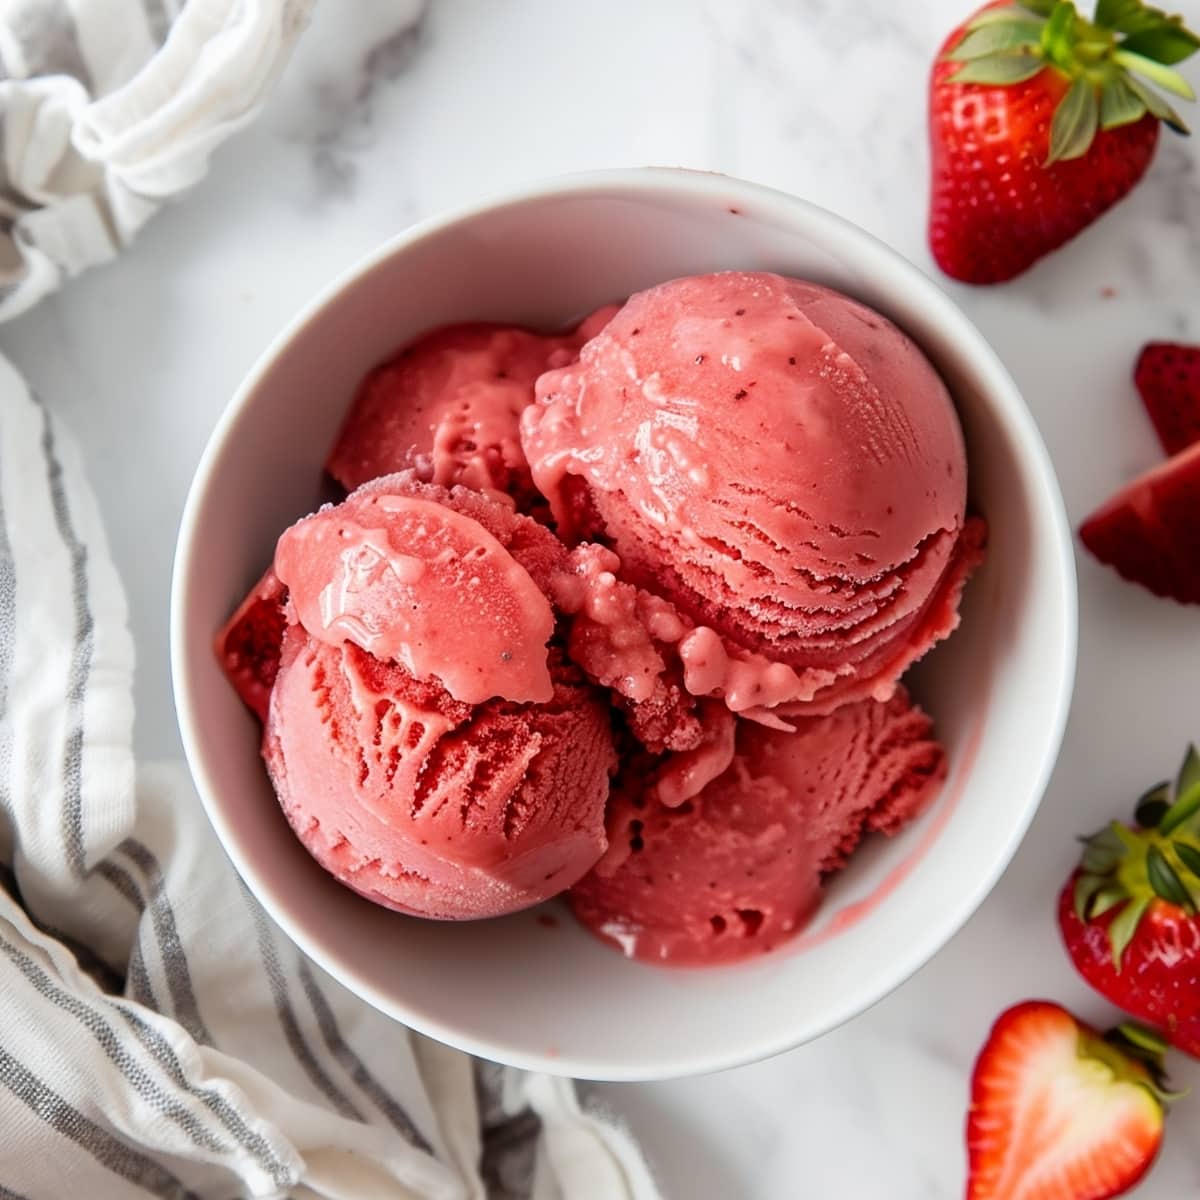 Scoops of sweet red strawberry sorbet in a bowl, overhead view